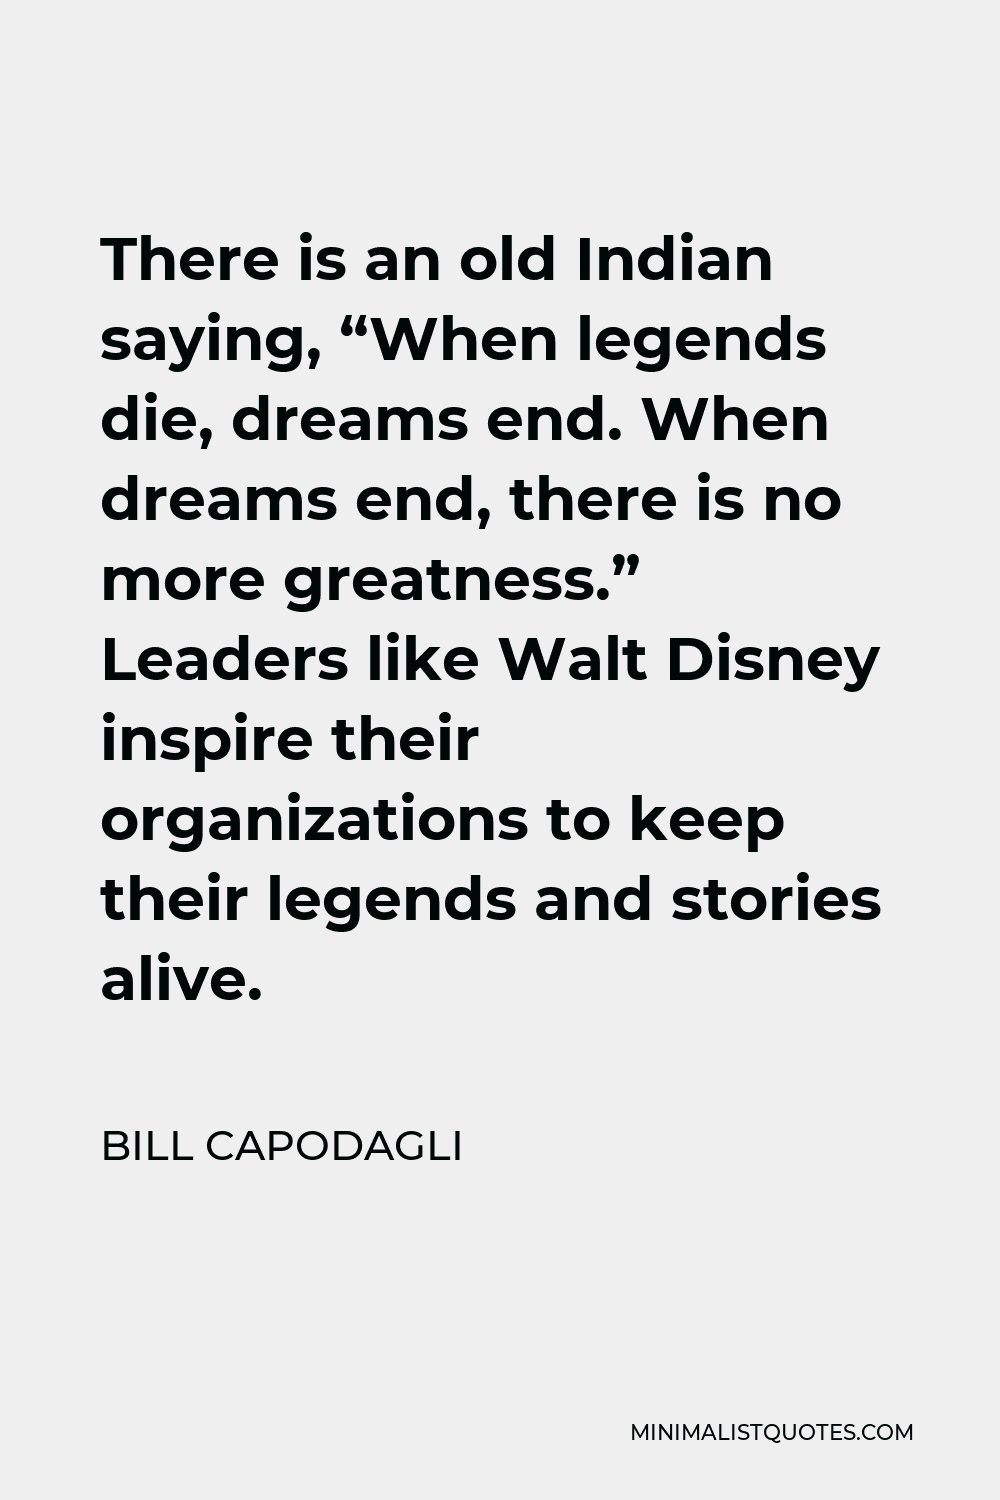 Bill Capodagli Quote - There is an old Indian saying, “When legends die, dreams end. When dreams end, there is no more greatness.” Leaders like Walt Disney inspire their organizations to keep their legends and stories alive.